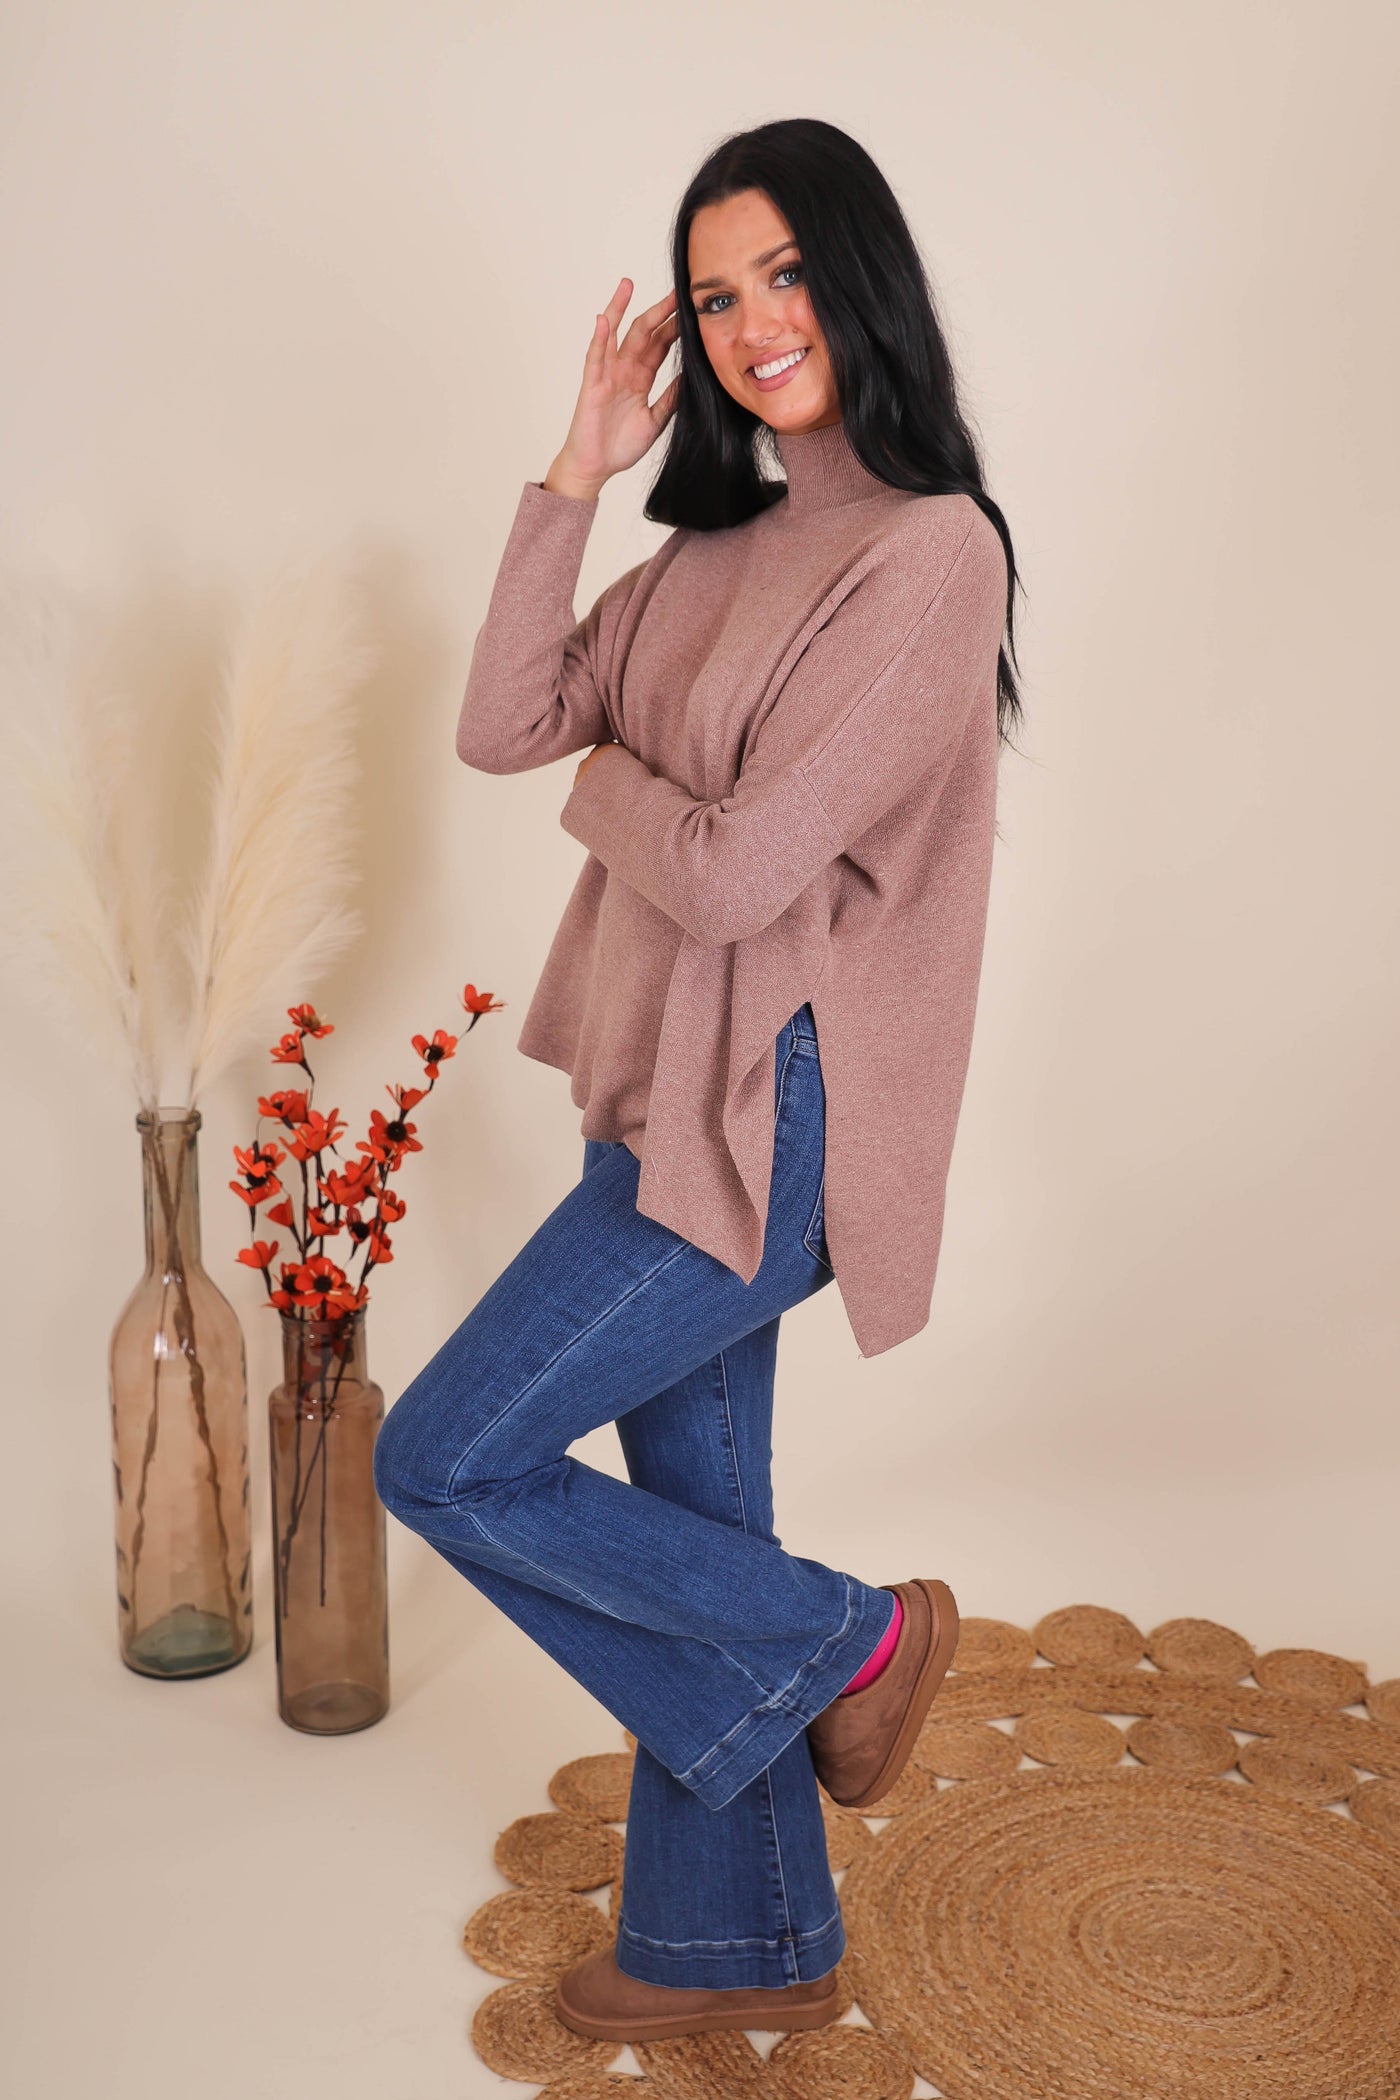 Women's Buttery Soft Sweater- Women's Oversized Poncho Sweater- Entro Sweaters